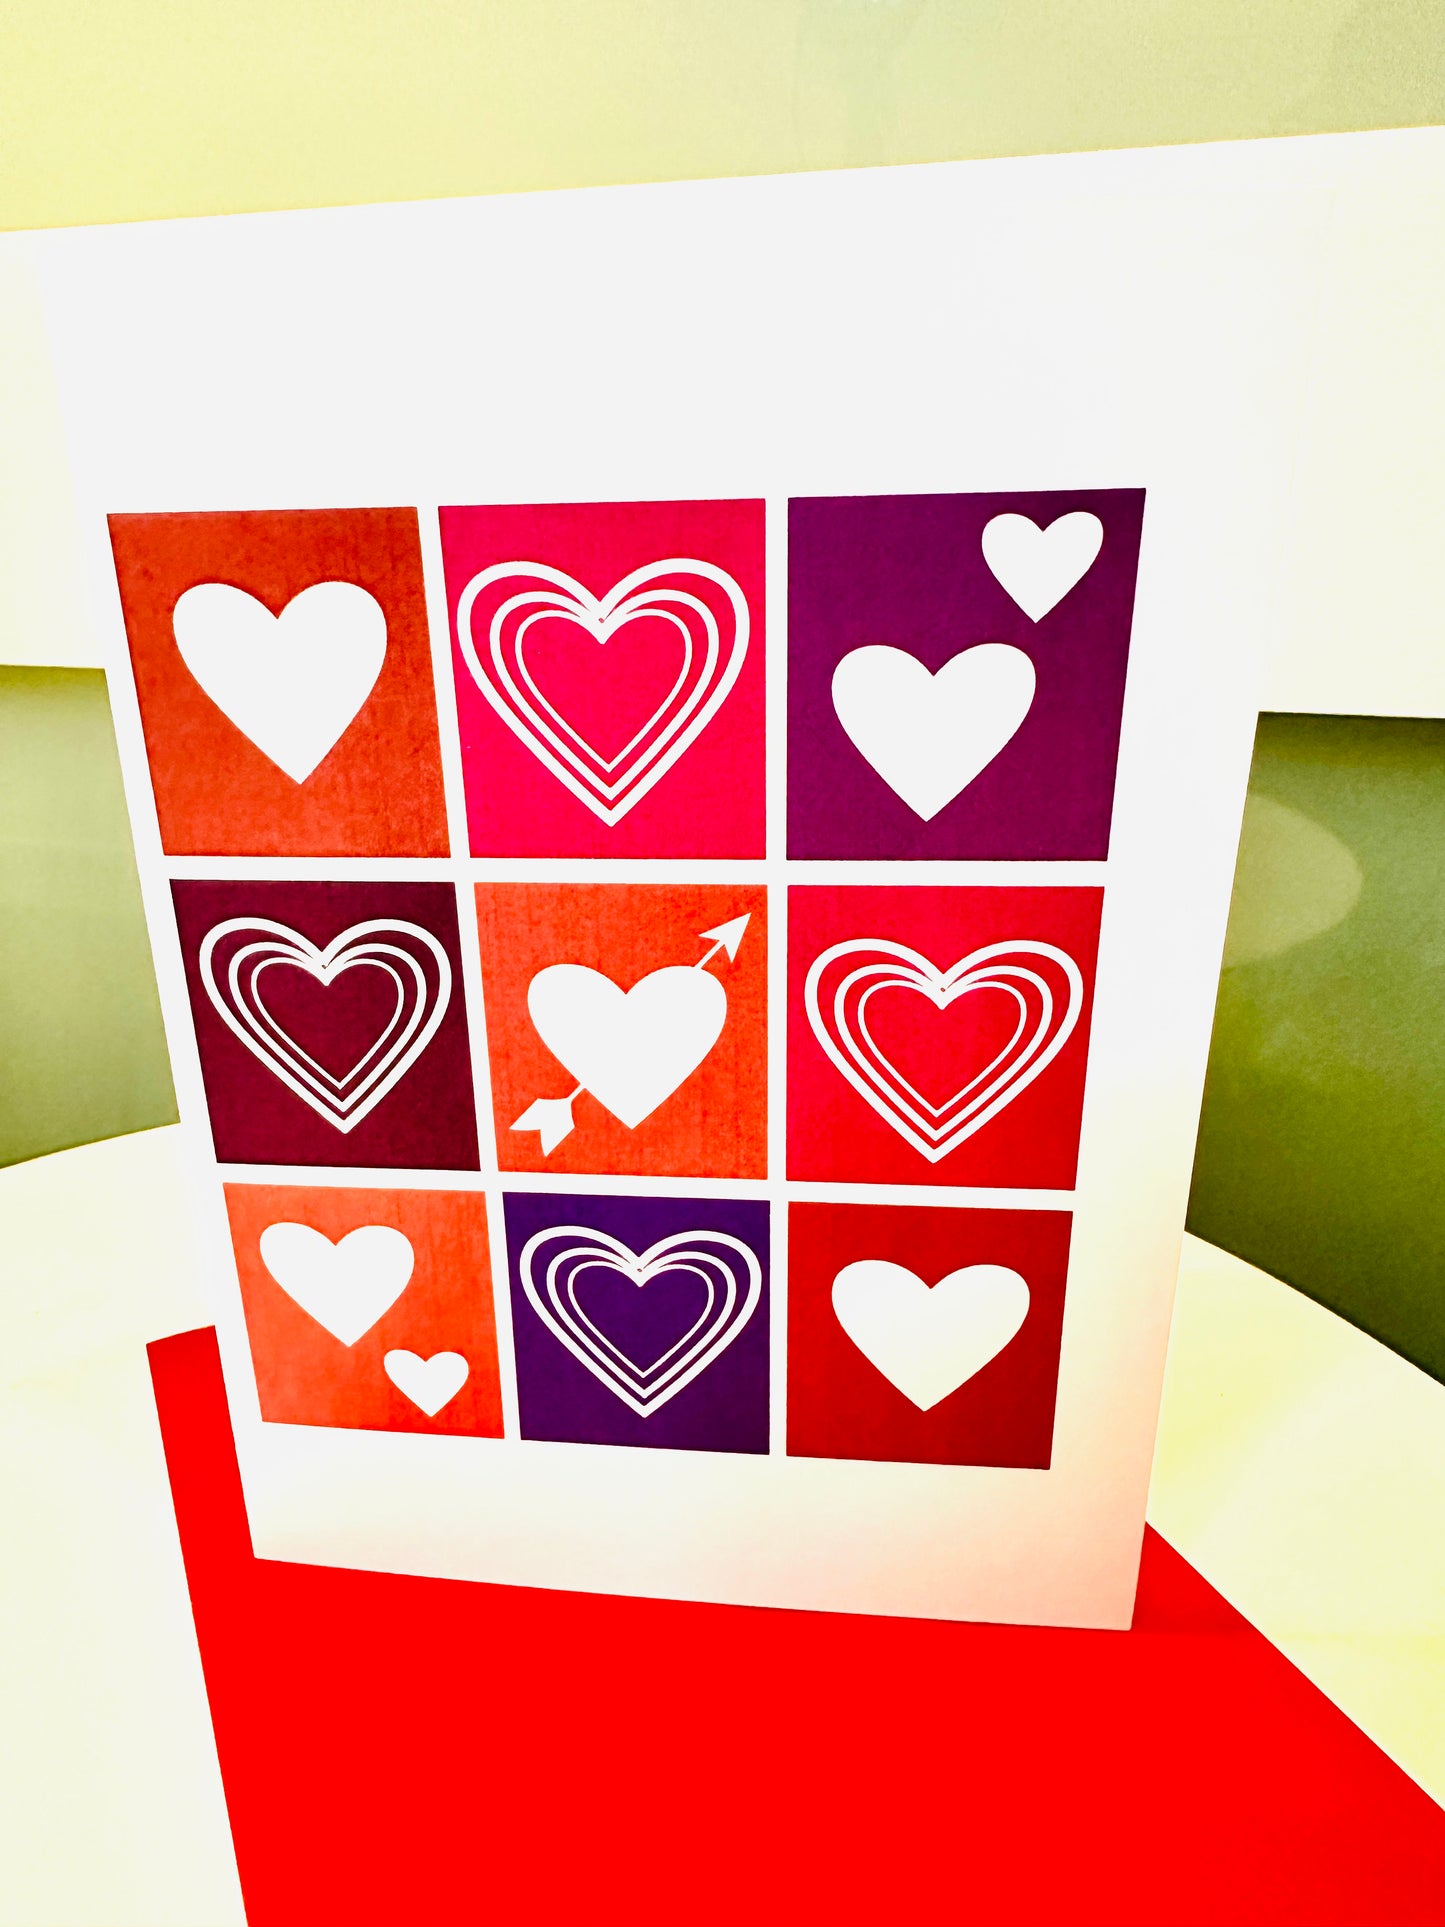 Tic Tack Hearts 5x7 Anniversary Greeting Card Say with multiple hearts!